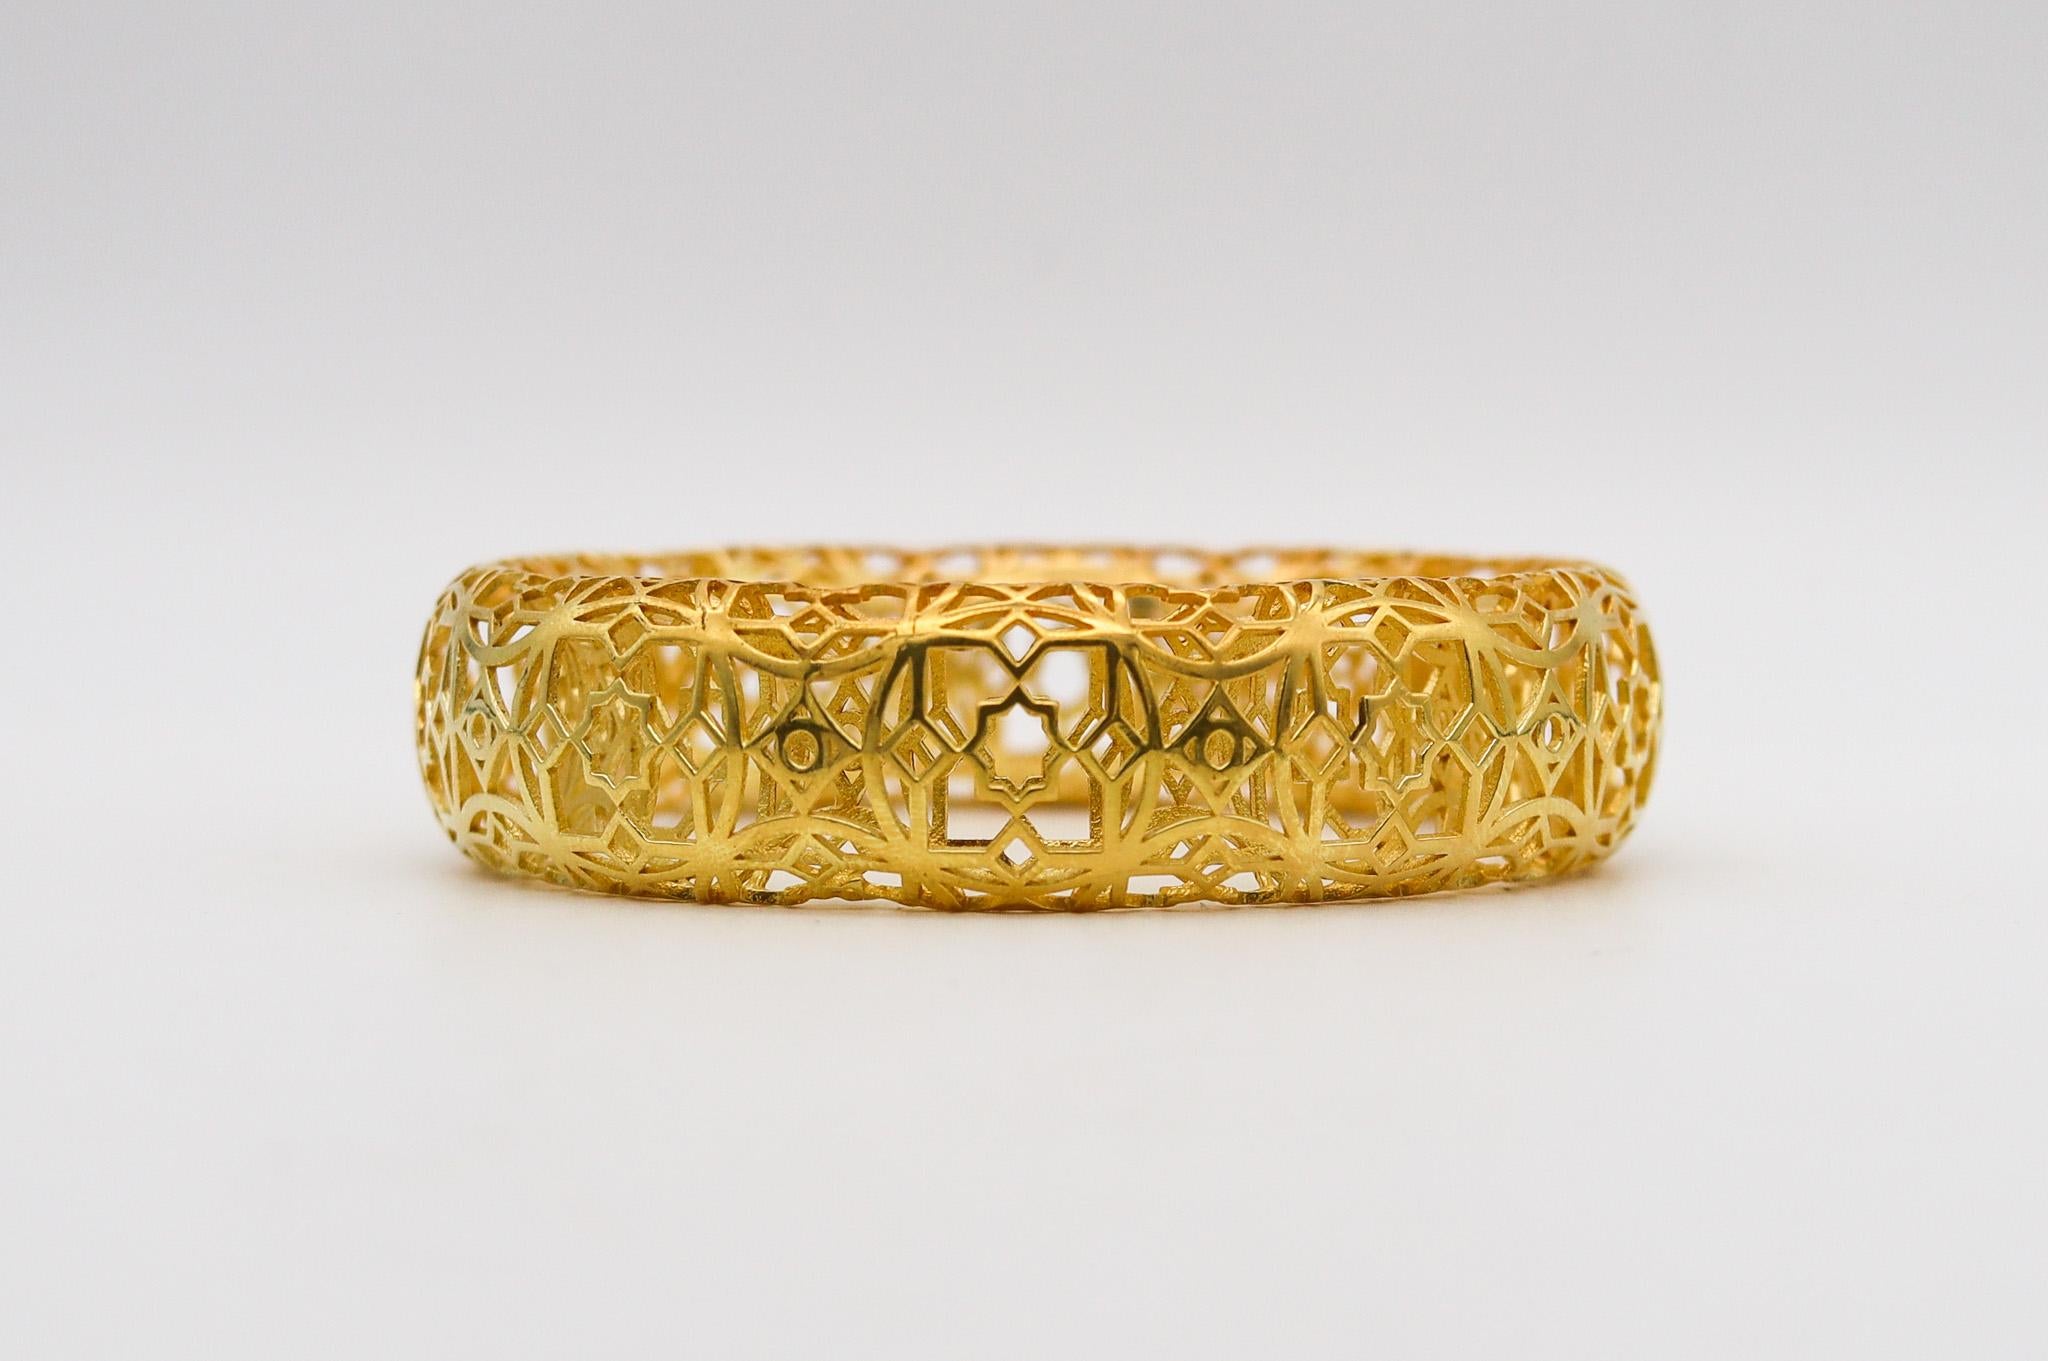 Marrakesh bangle bracelet designed by Paloma Picasso for Tiffany & Co.

Gorgeous tridimensional bangle bracelet, created by Paloma Picasso for the Tiffany Studios, This rare bracelet is from the iconic Marrakesh collection, crafted in 18Kt yellow